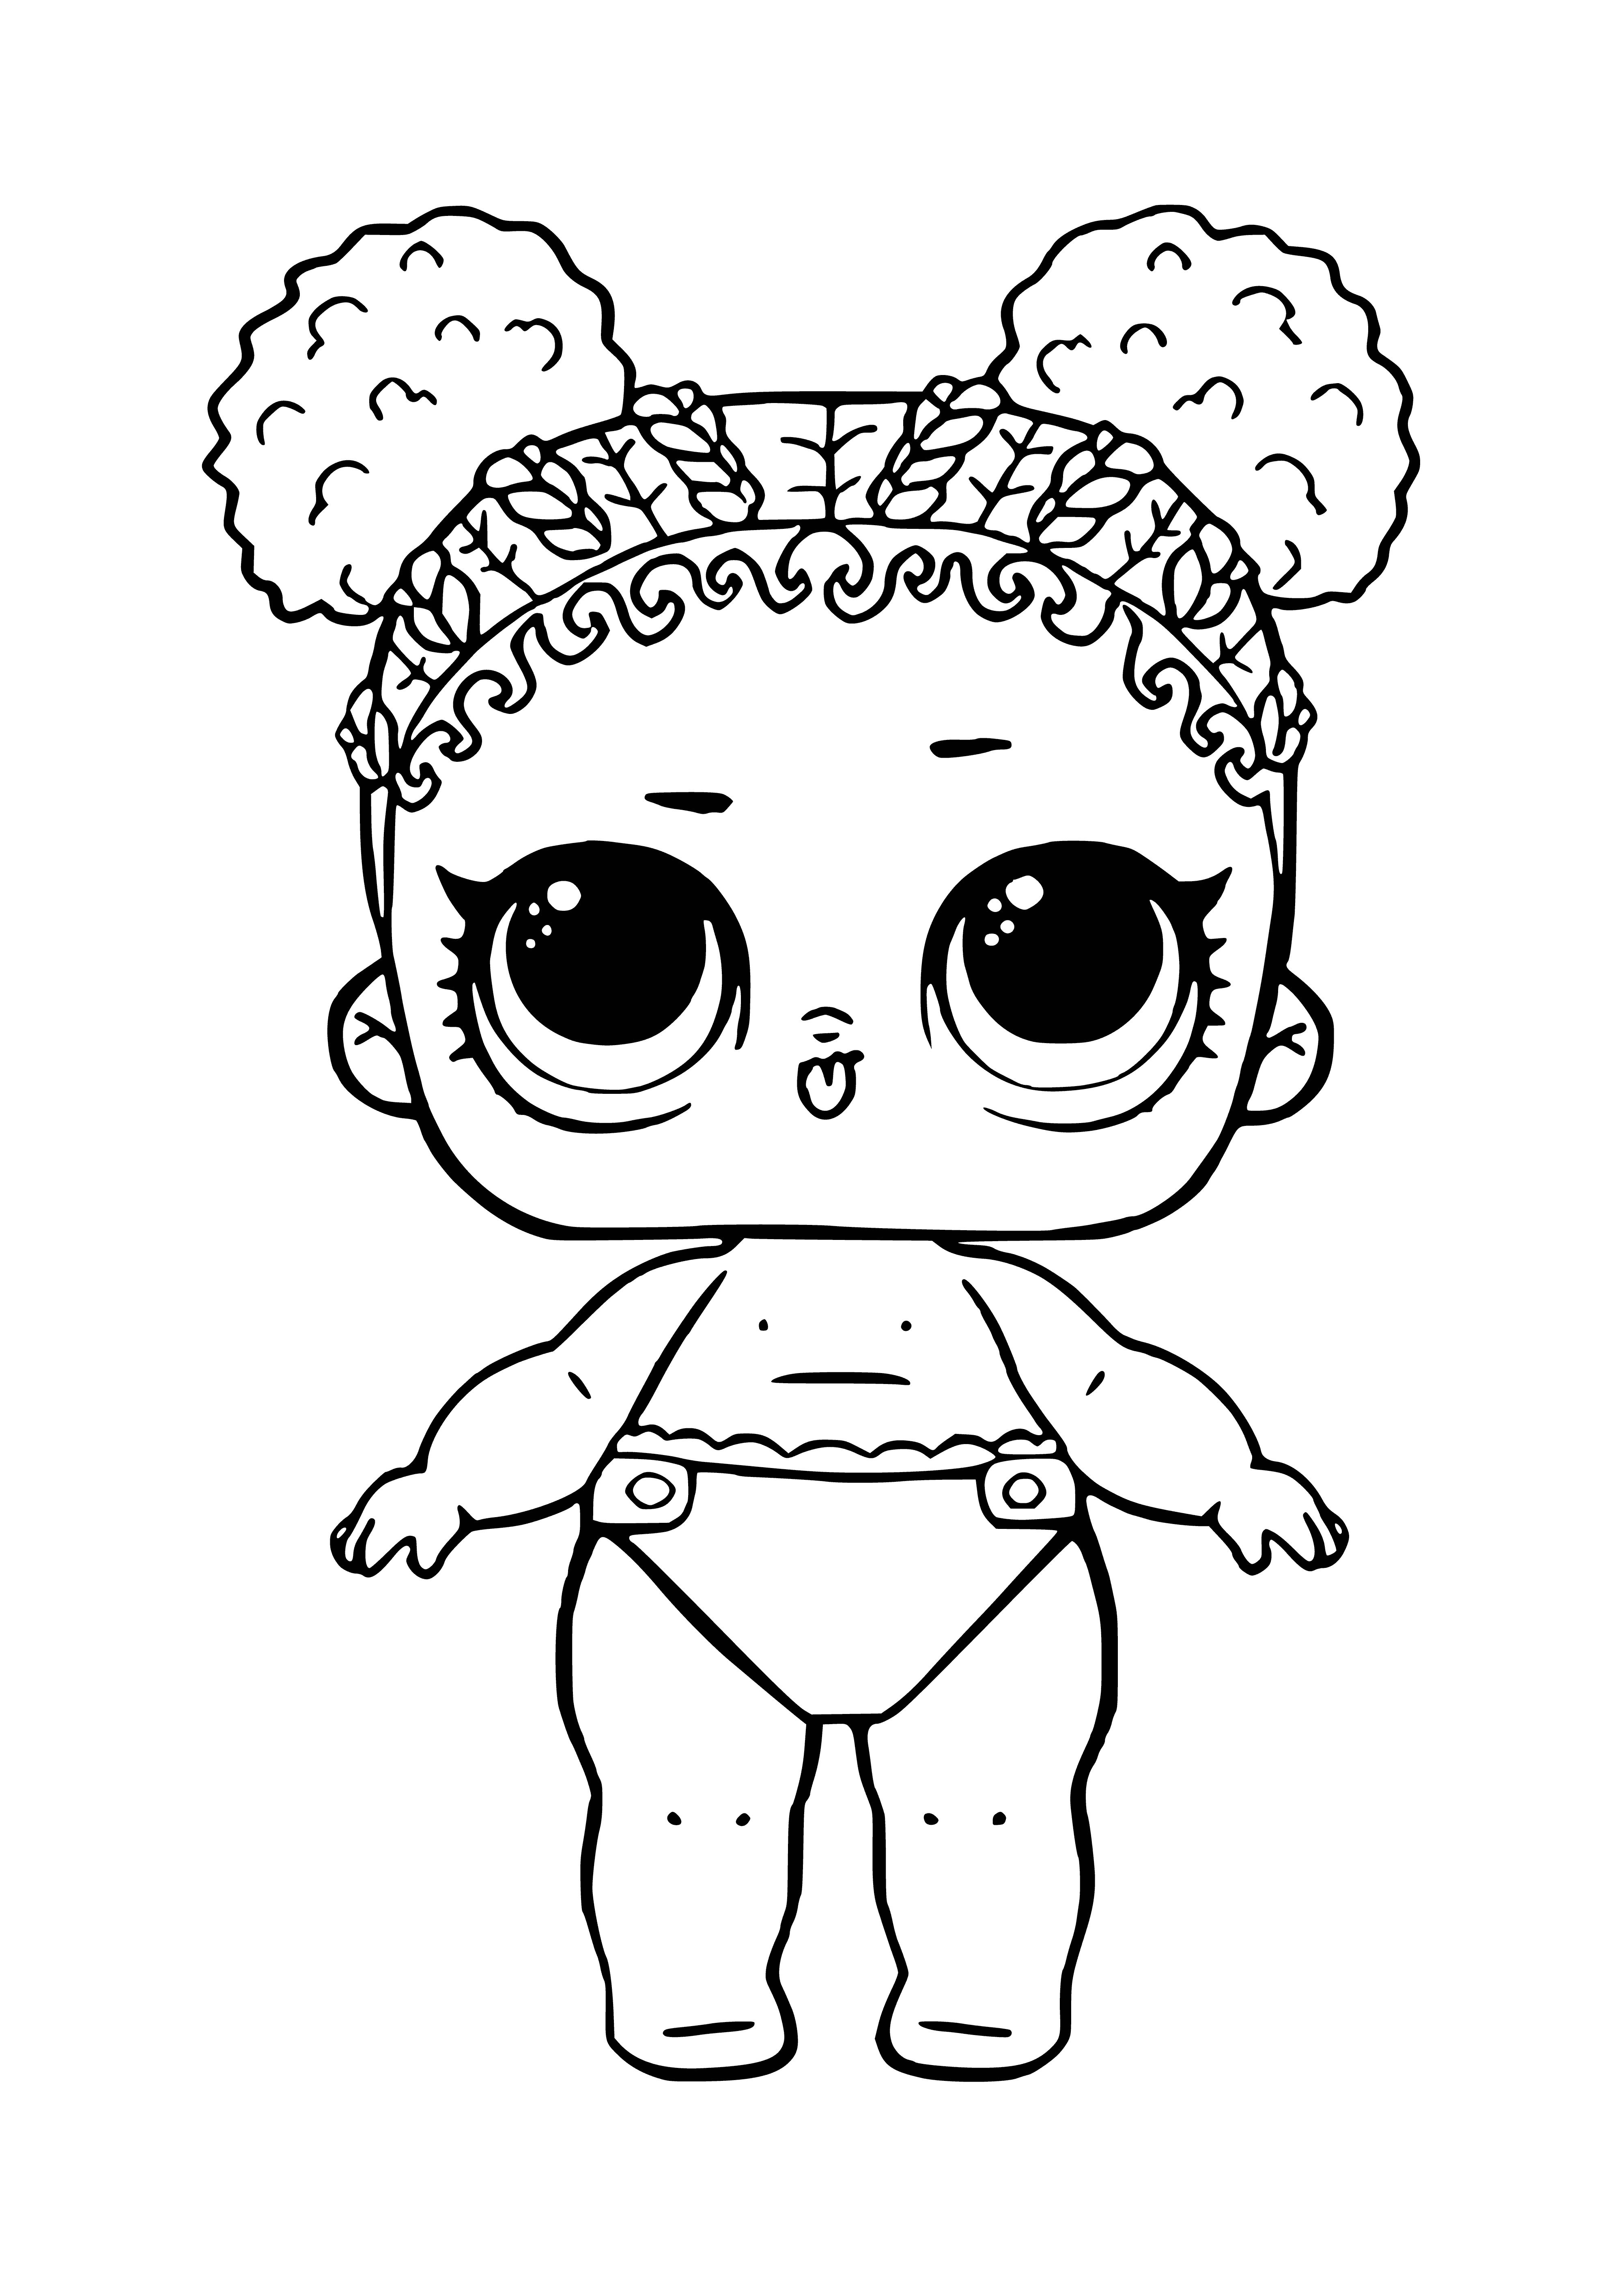 LOL baby Flower coloring page